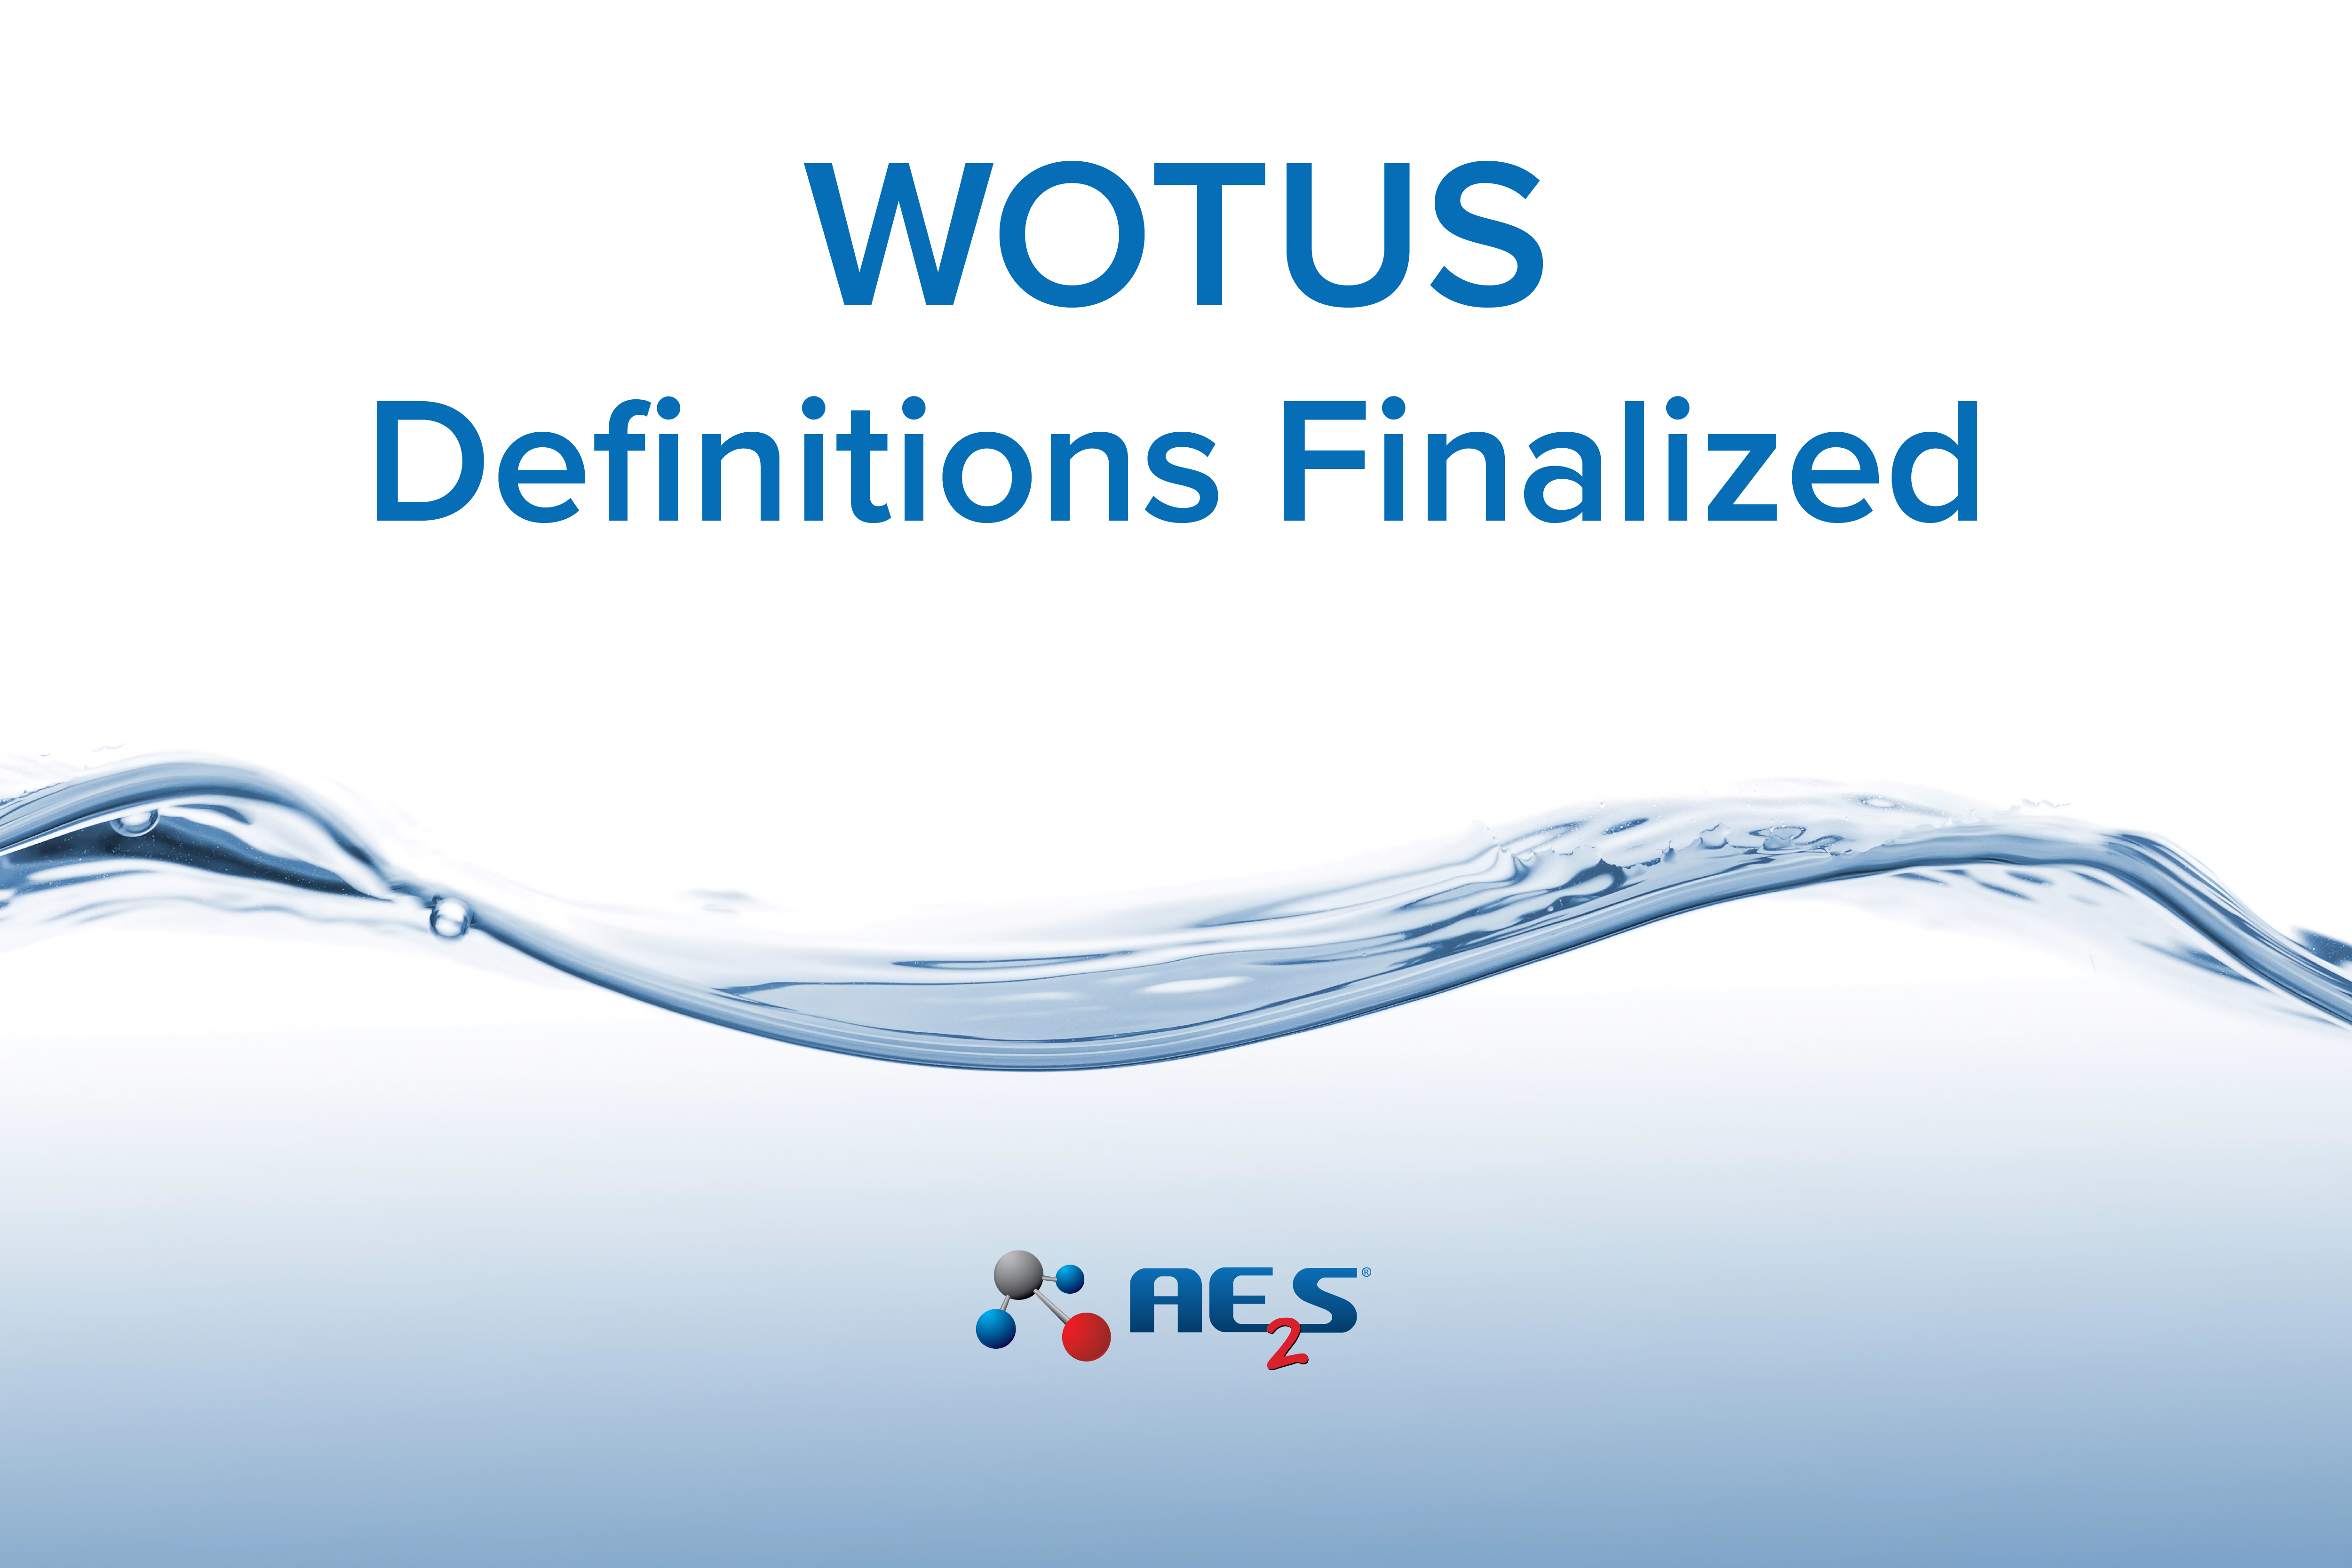 <strong>WOTUS Definitions Finalized, Lawsuit to Block Implementation Filed</strong>